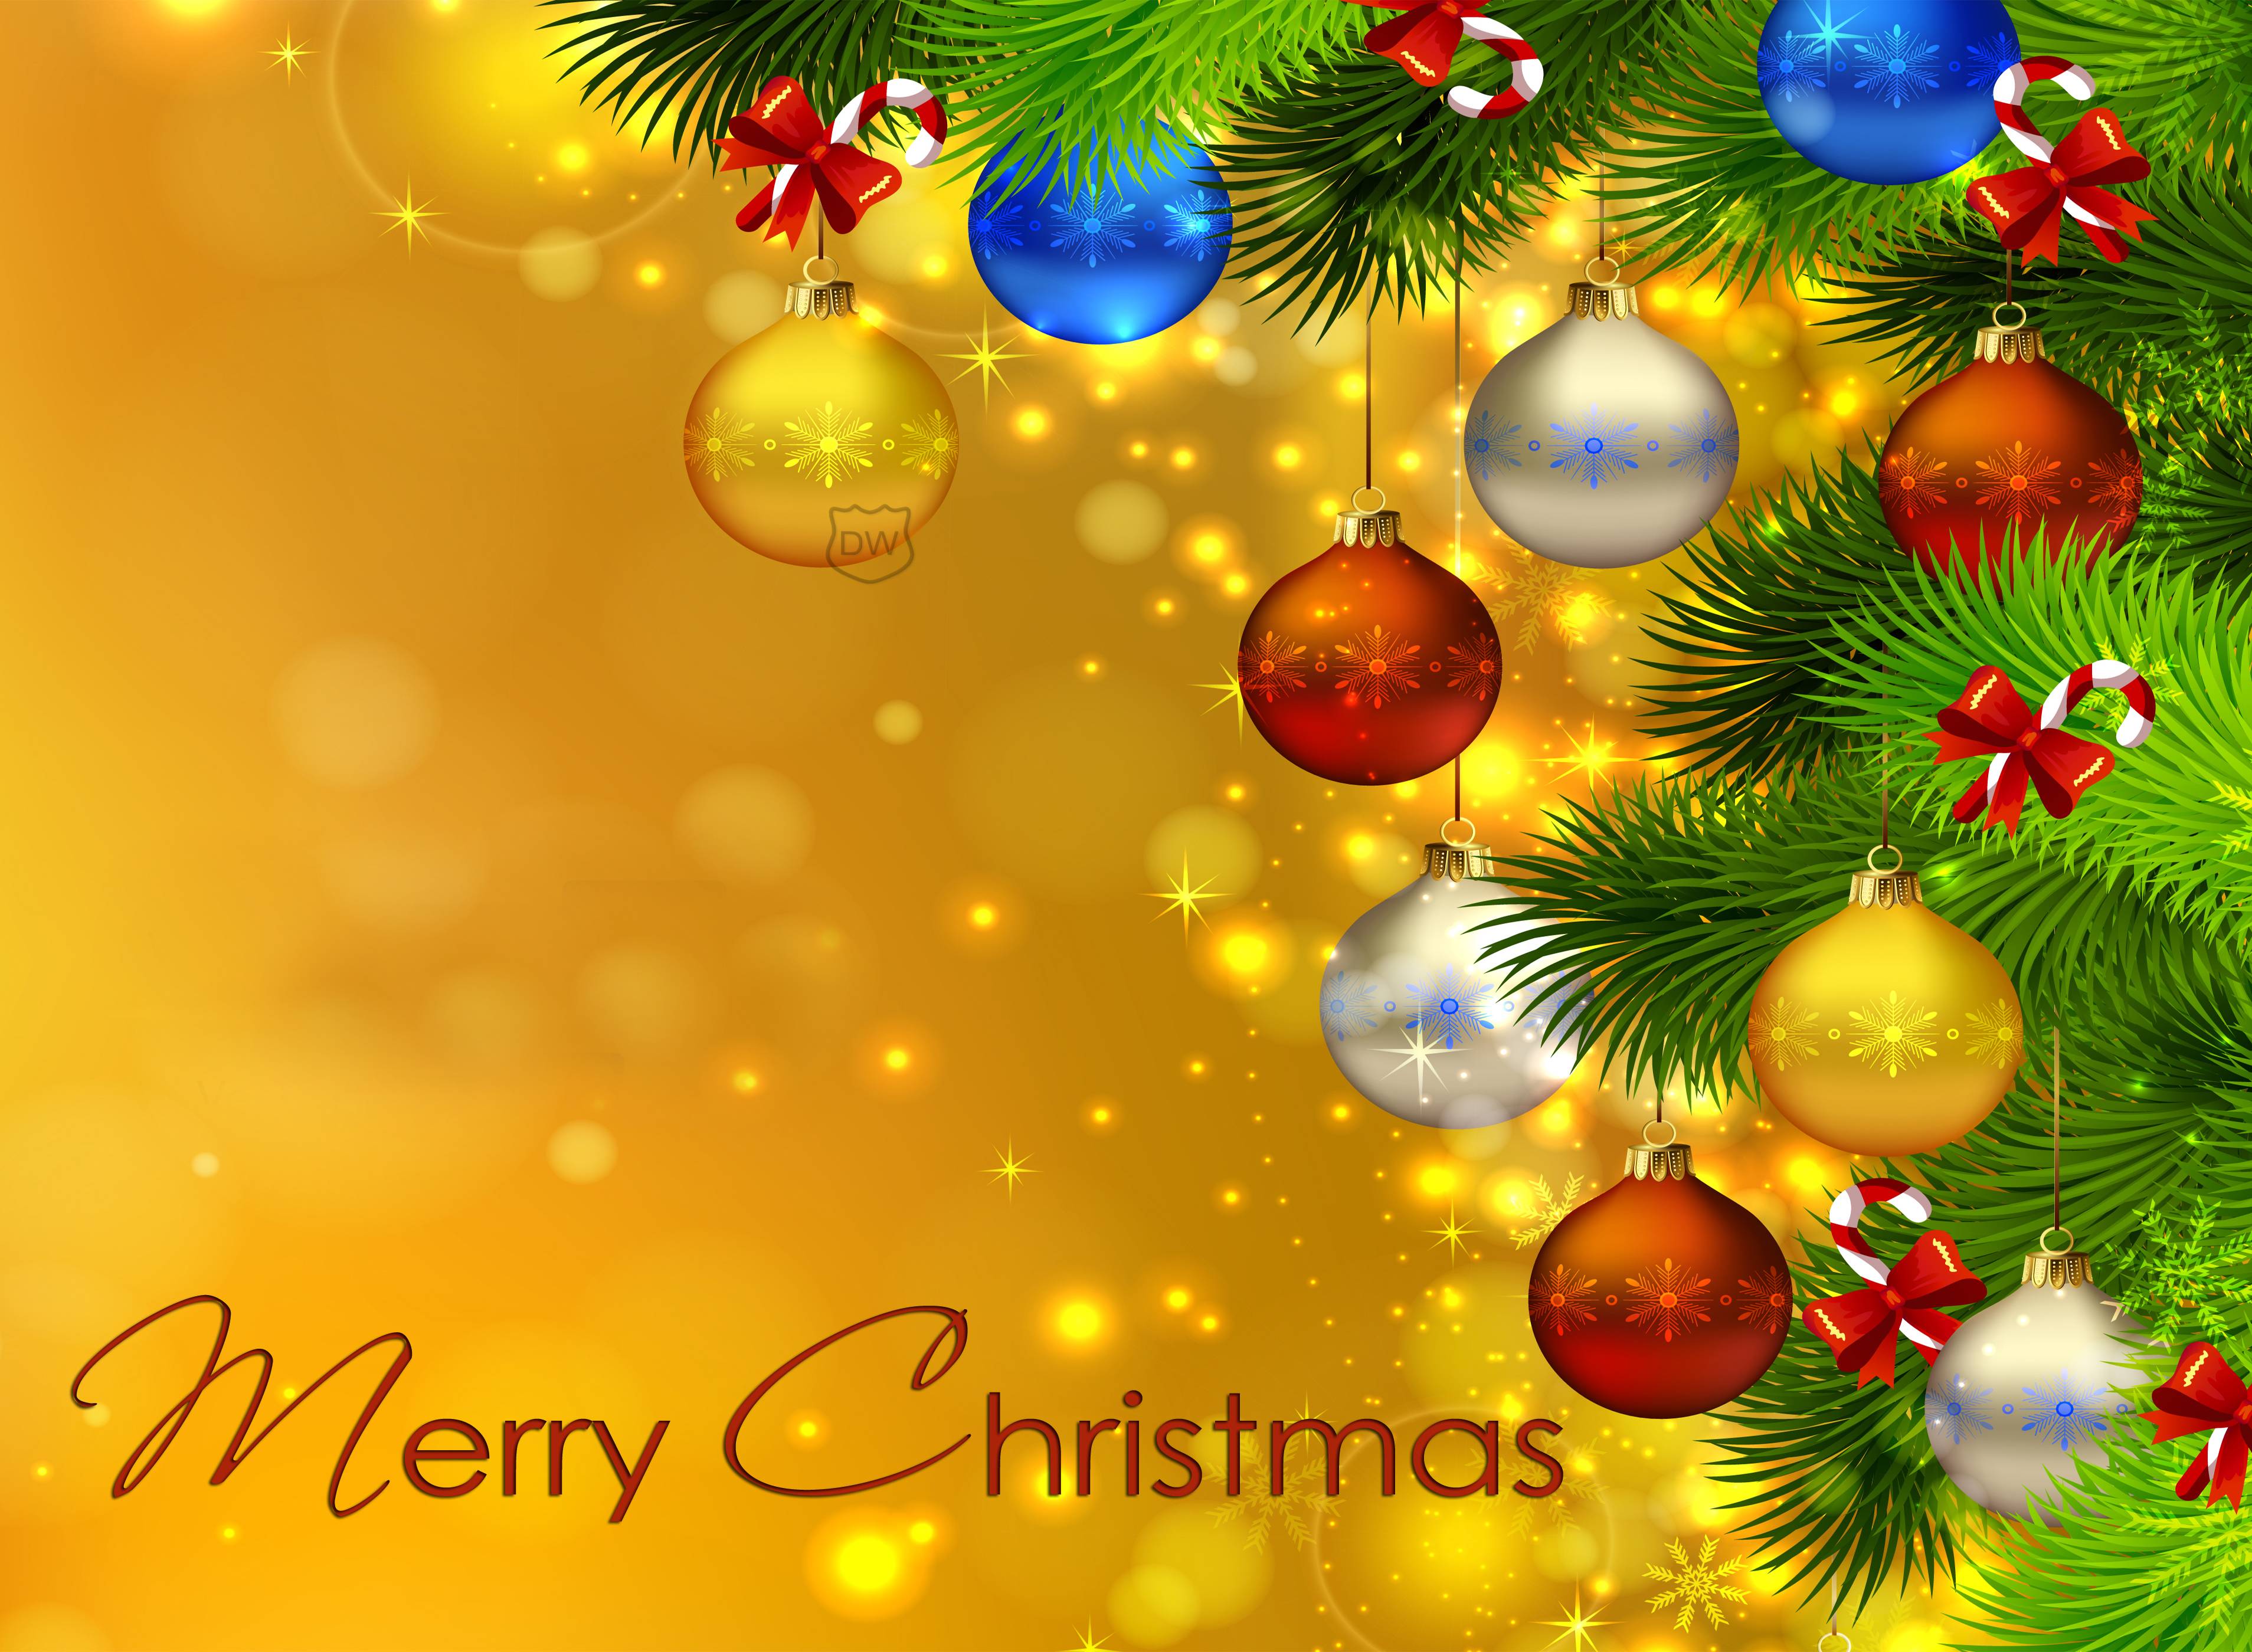 merry christmas images download free